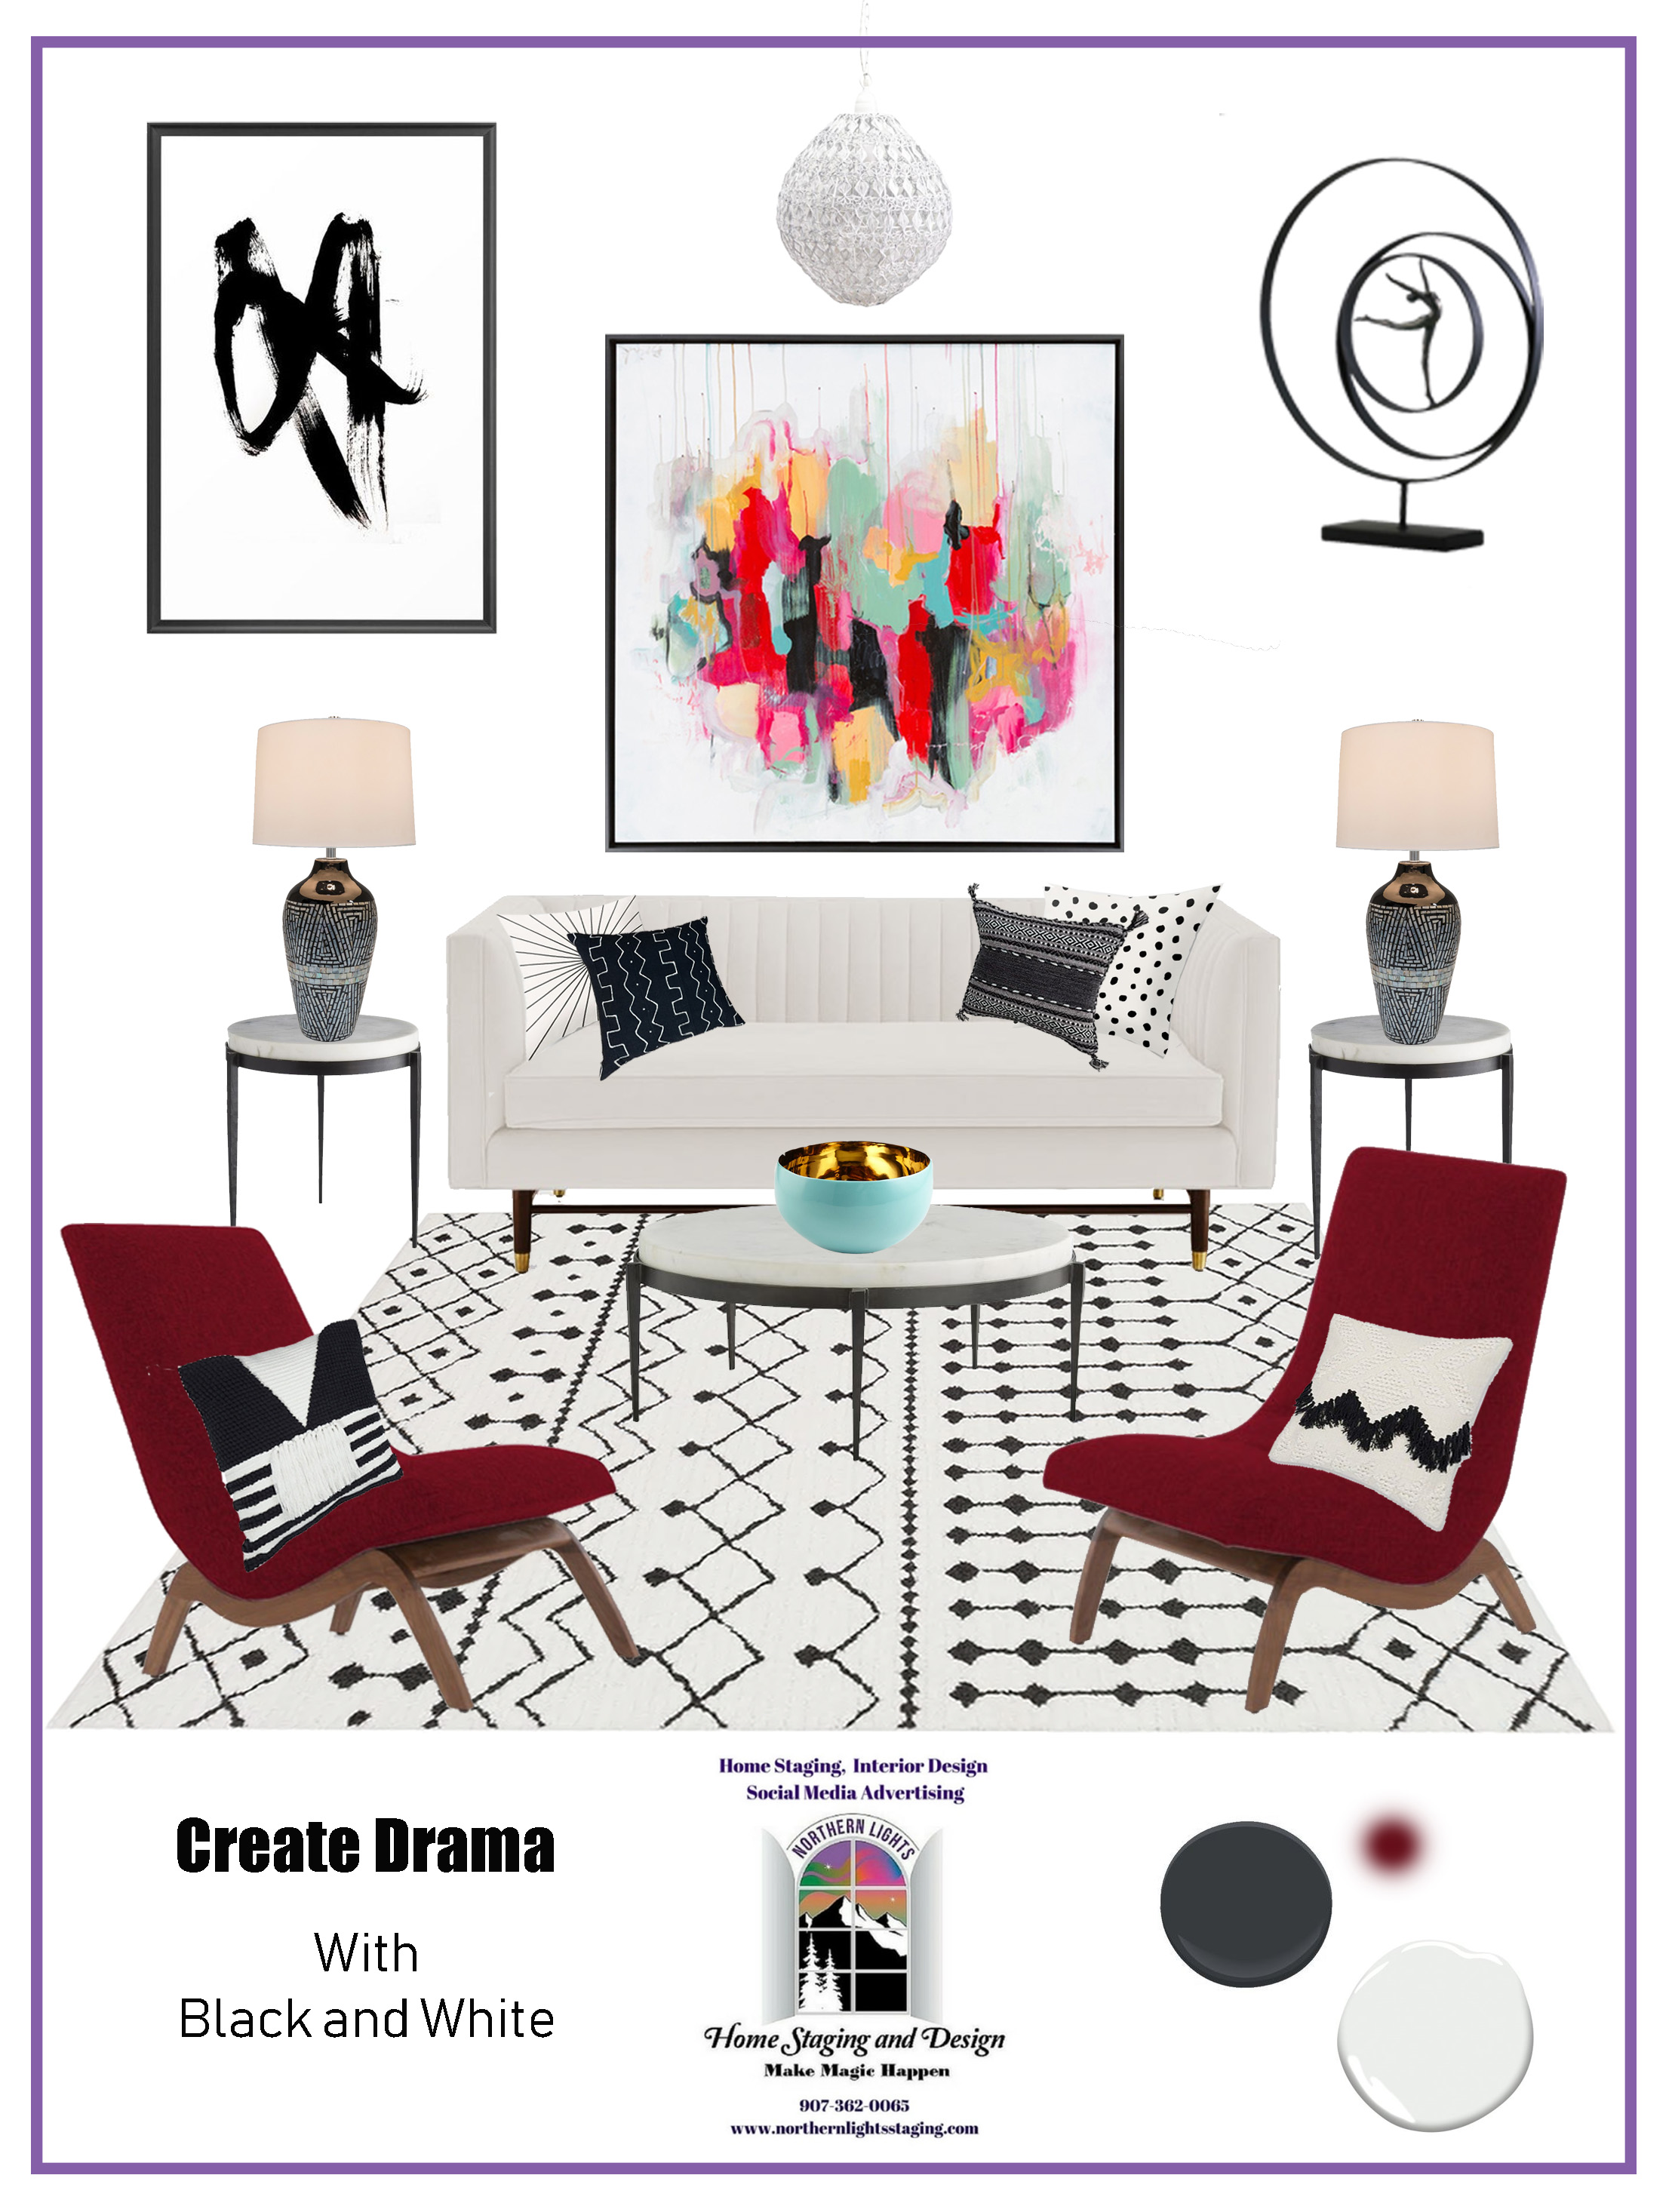 Get dramatic with Black and White. Get the look- Black and white Bohemian Style. #blackandwhite #bohemian #boho #globaldesign #interiordesign #homedecor #virtualdesign #edesign #colorfulhome